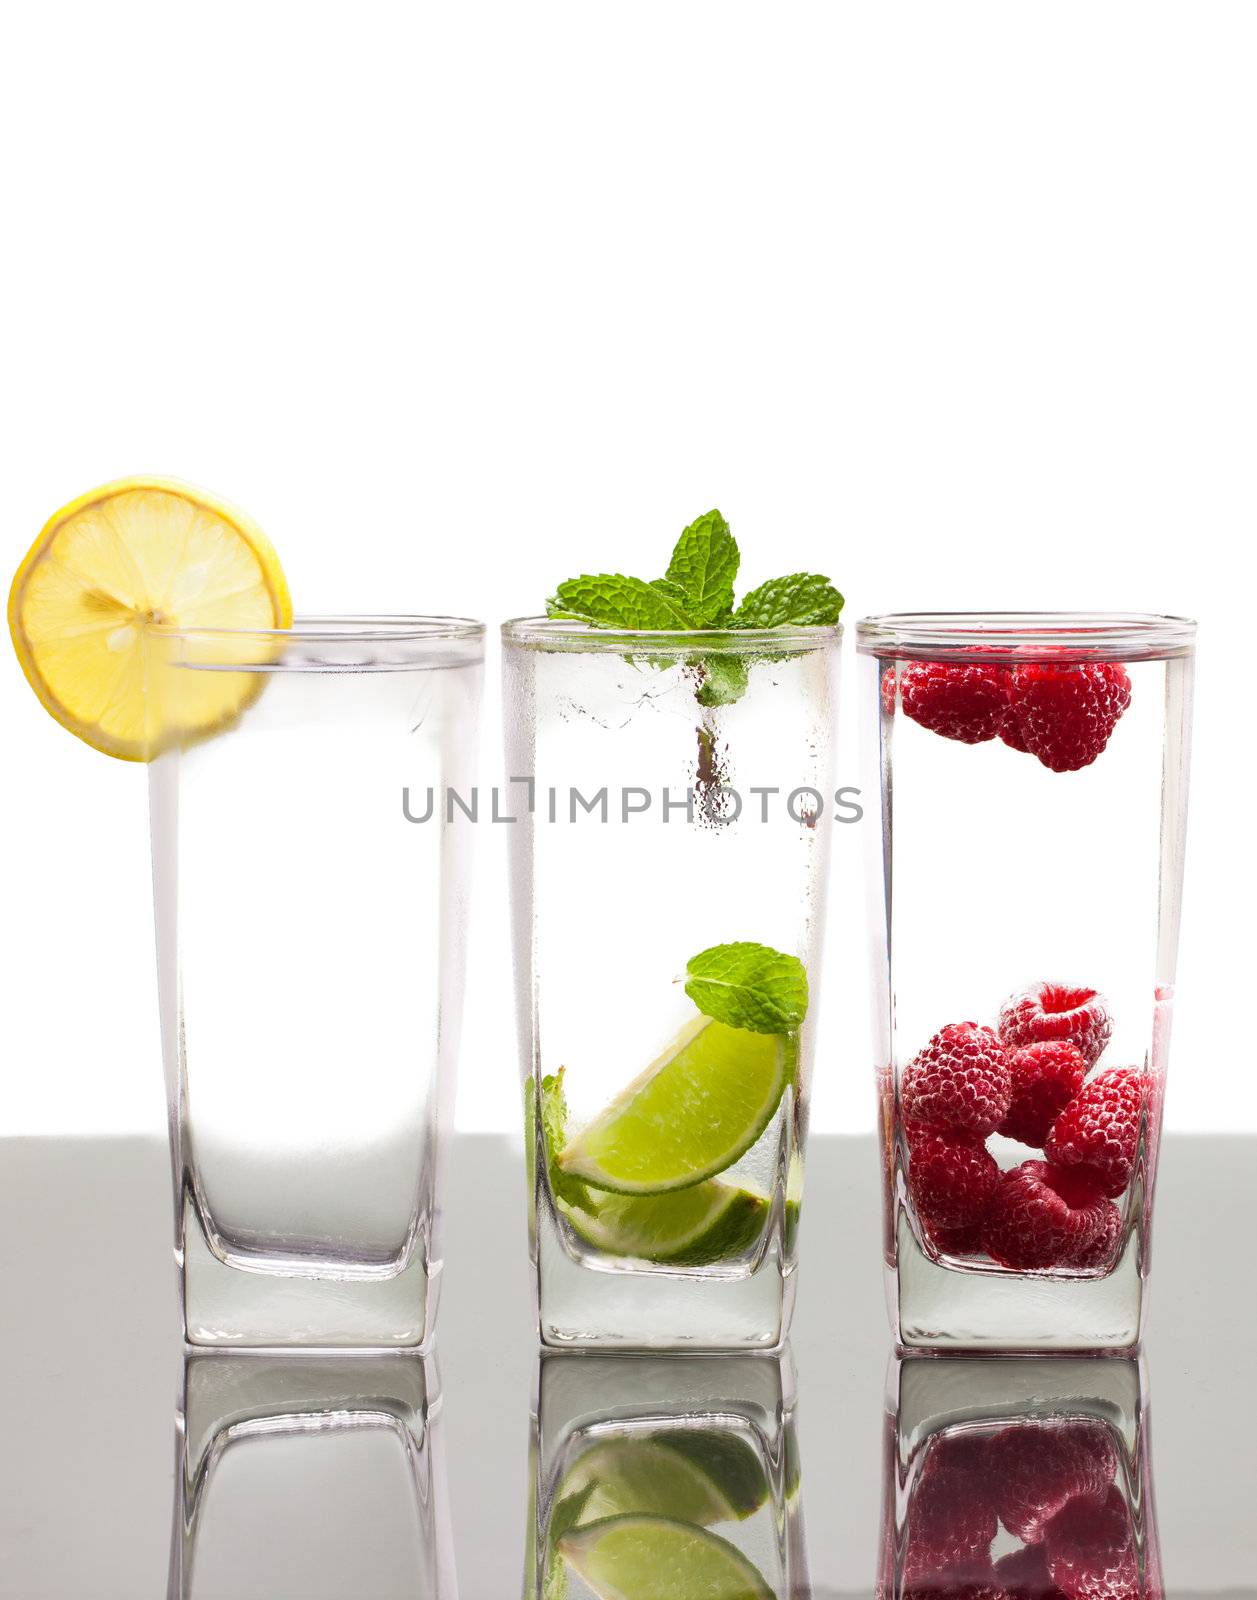 Three colorful alcoholic drinks with various berries, fruit and ice. On a table with reflection and isolated over white.